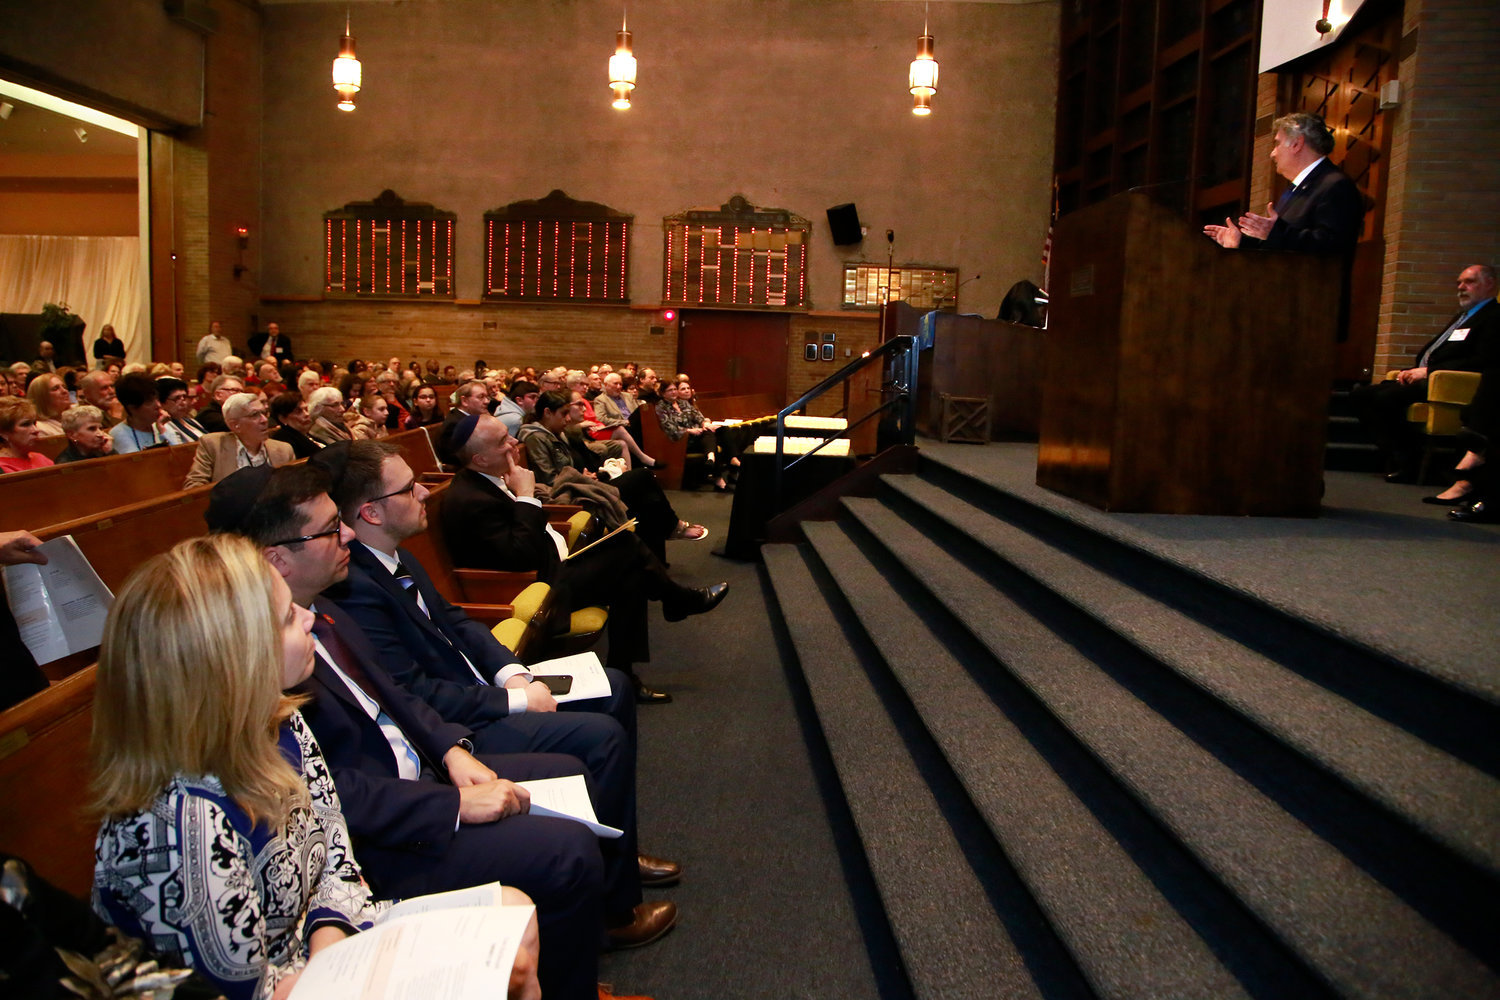 In 2019, Rabbi Joseph Potasnik, whose parents survived the Holocaust, recently spoke at Congregation Shaaray Shalom in West Hempstead to mark Holocaust Remembrance Day. The congregation is planning a Kristallnacht commemoration Nov. 7.